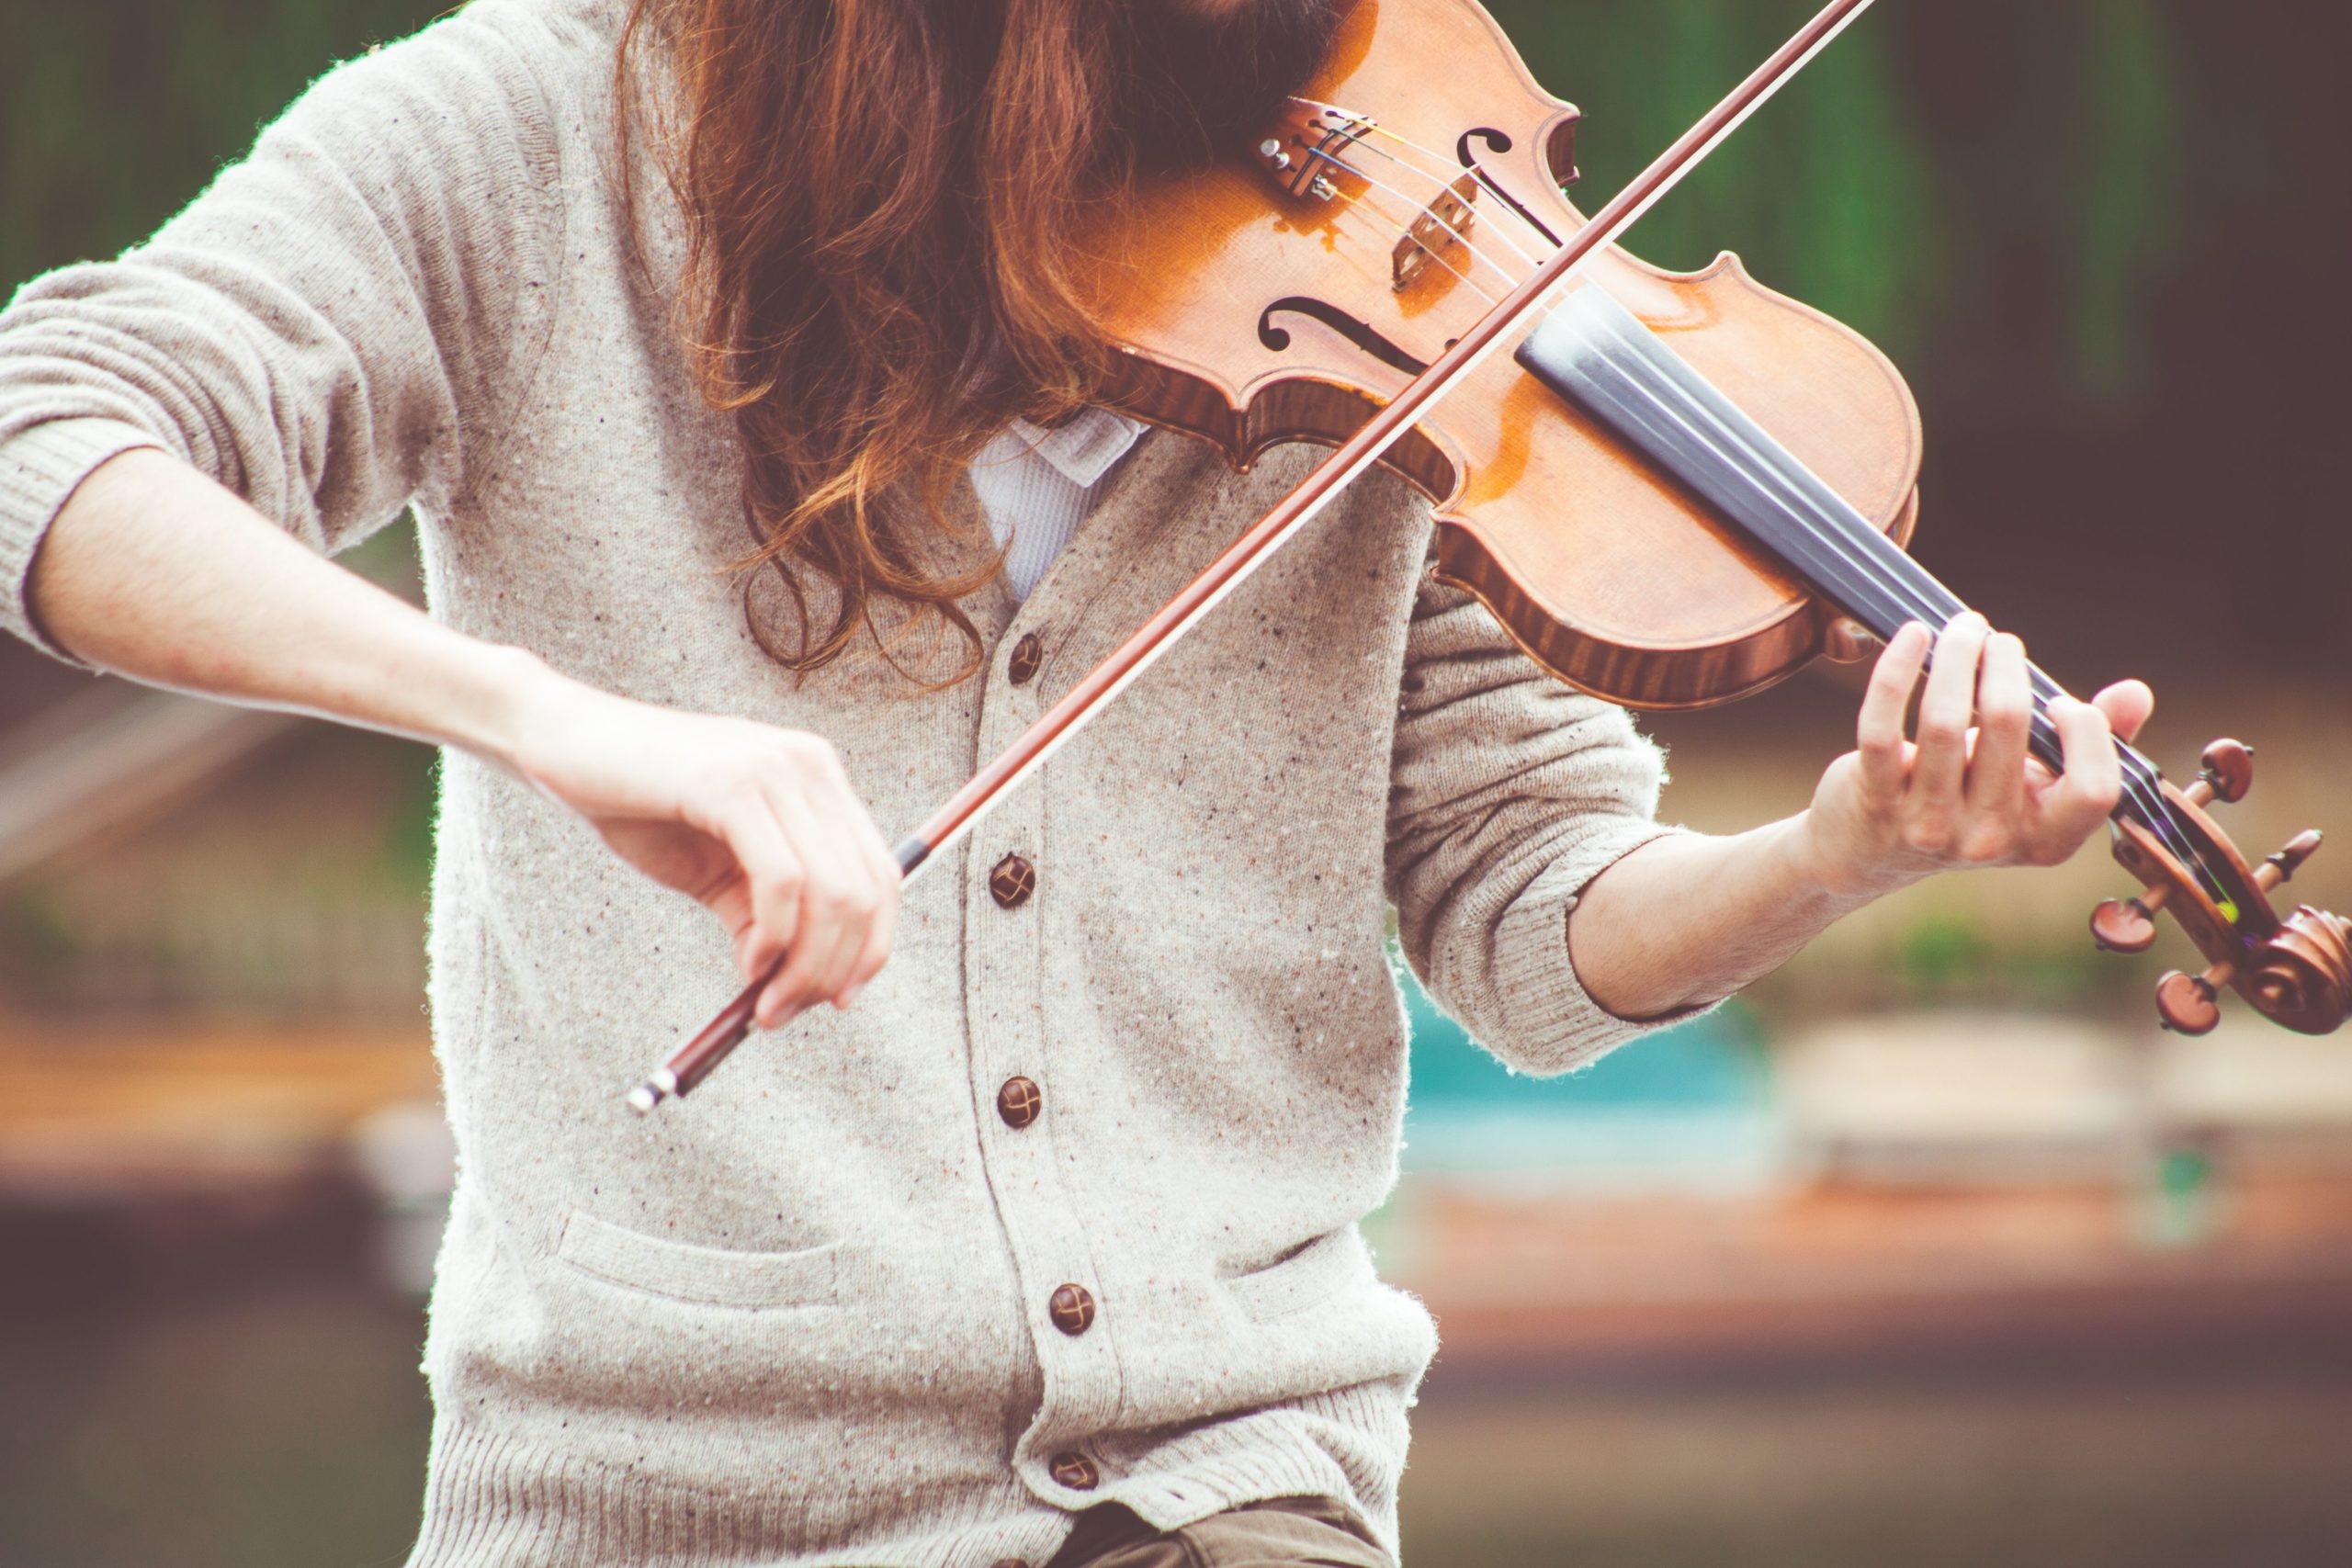 Image of a woman playing a violin